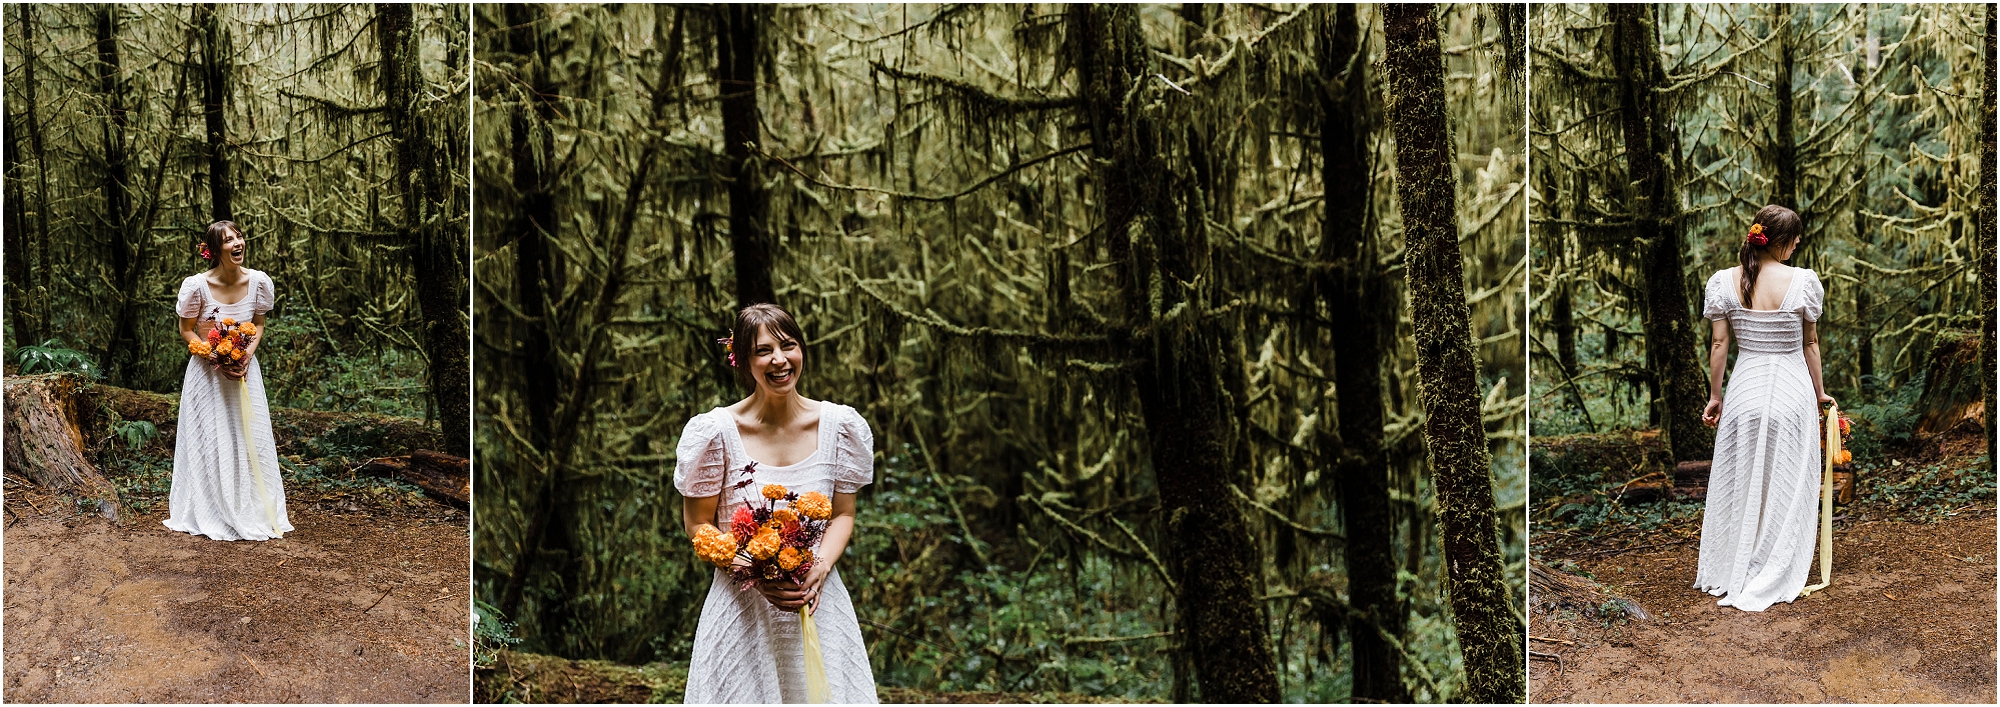 A gorgeous bride wearing a white puff sleeved BHLDN dress with an orange marigold bouquet standing in a beam of diffuse light in the dark PNW forest for her adventure elopement in Oregon. | Erica Swantek Photography